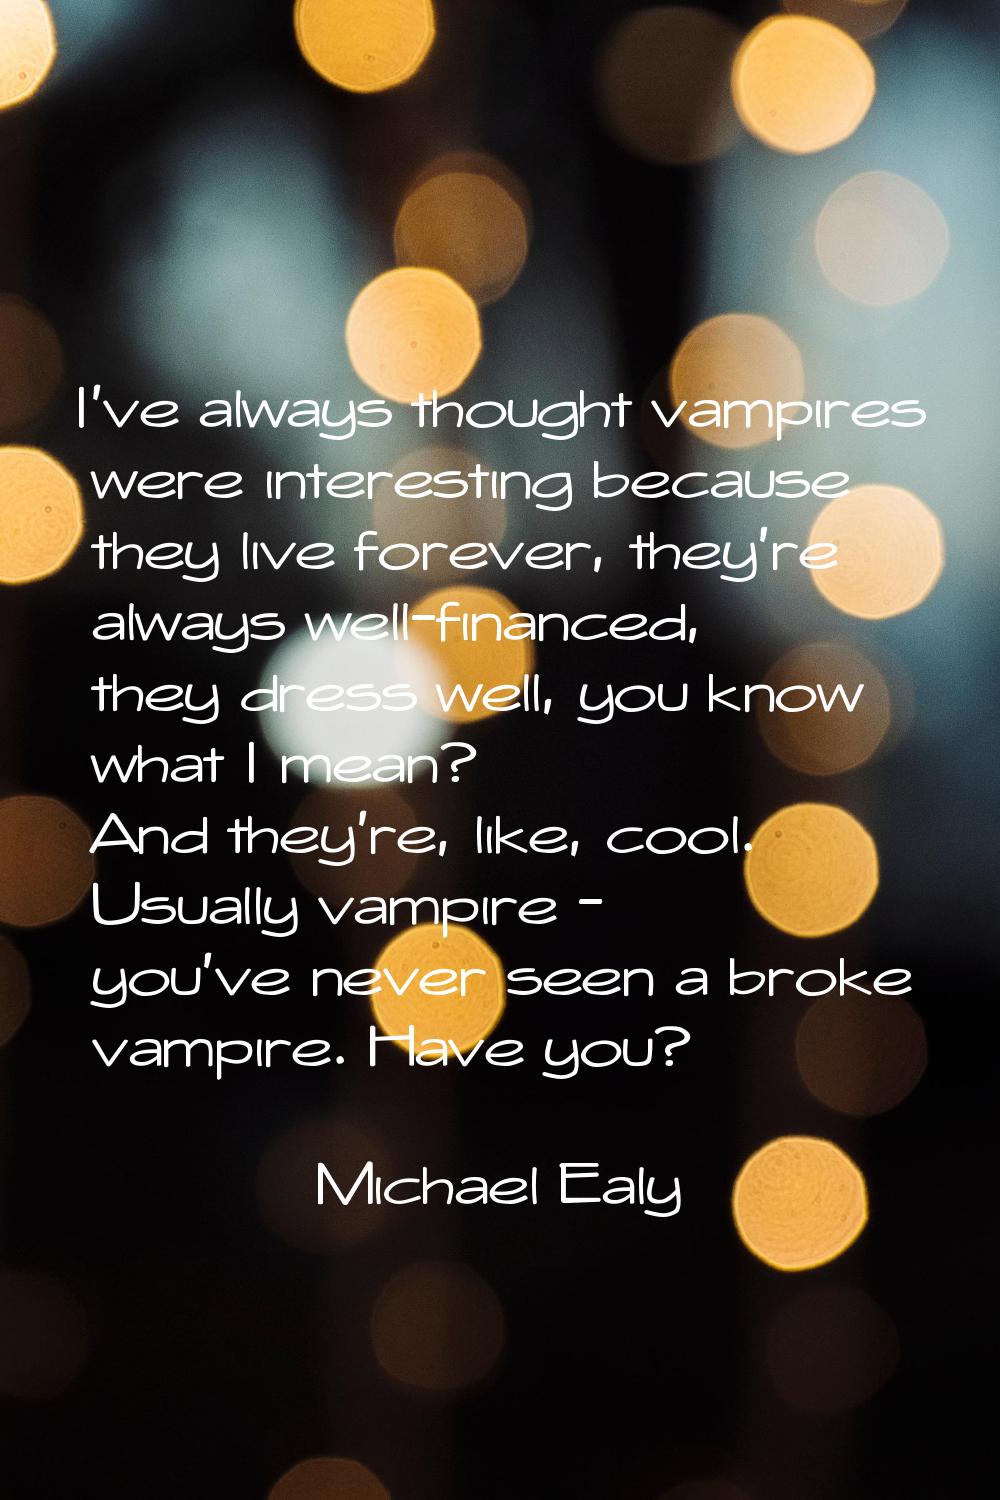 I've always thought vampires were interesting because they live forever, they're always well-financ